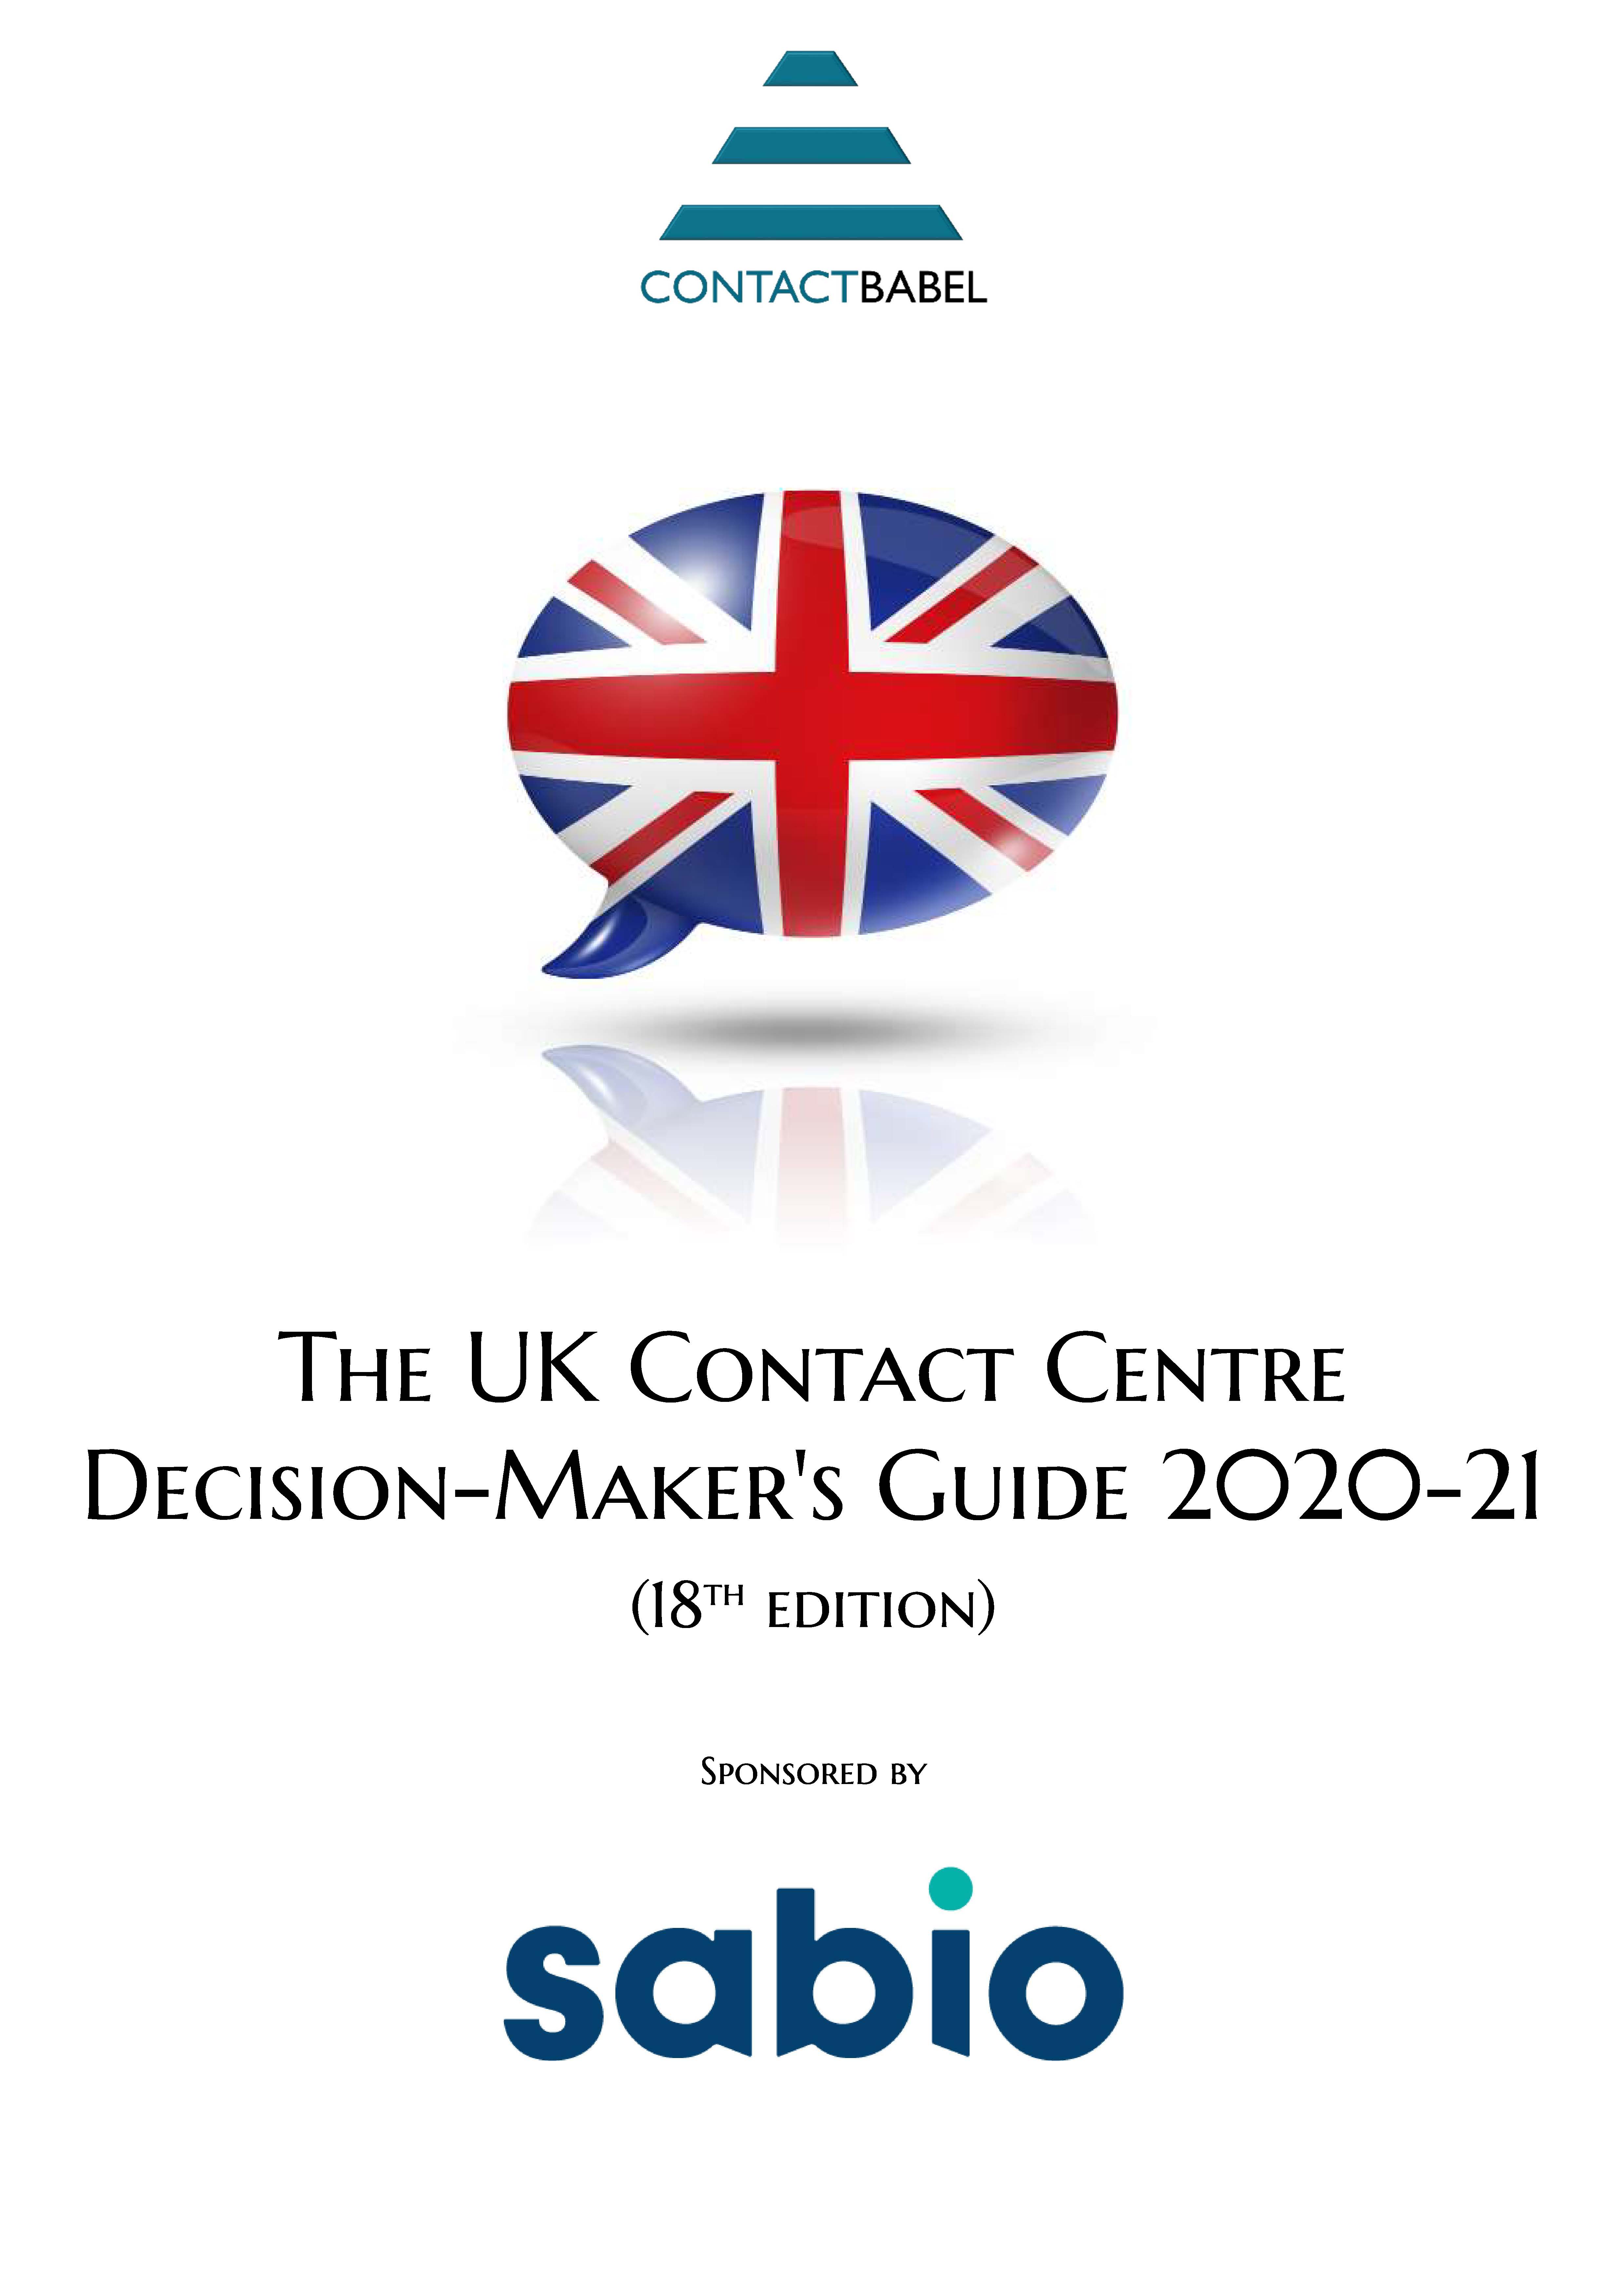 The UK Contact Centre Decision-Maker's Guide 2020-21